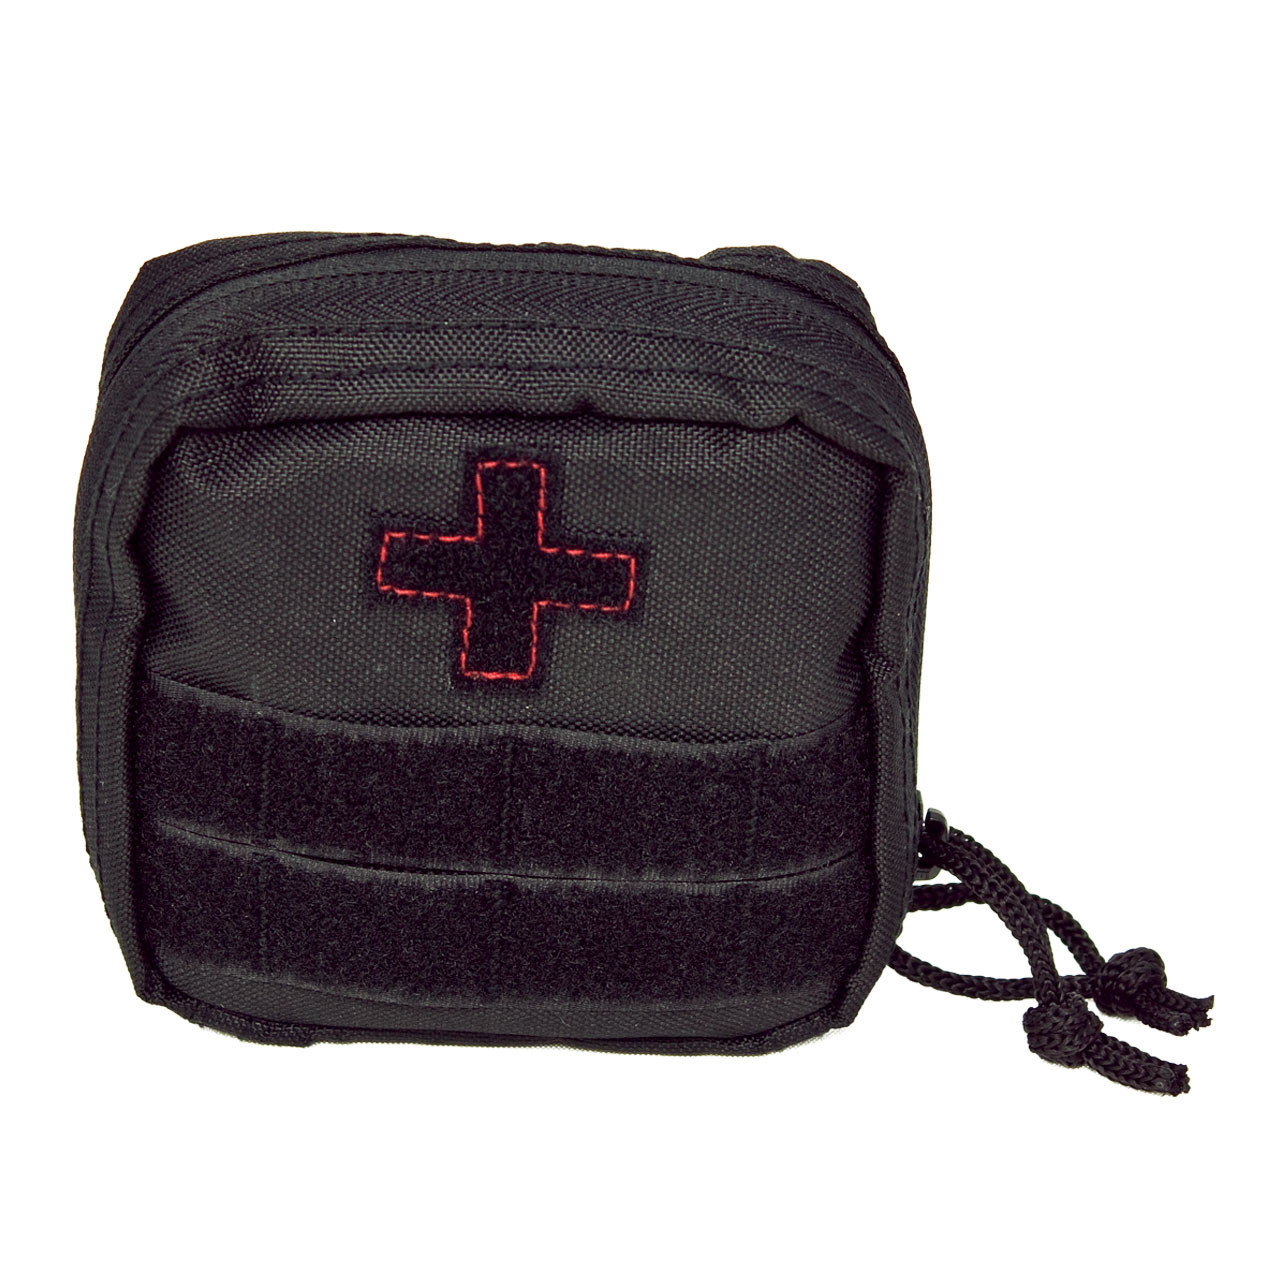 Soldier Individual First Aid Kit - Black